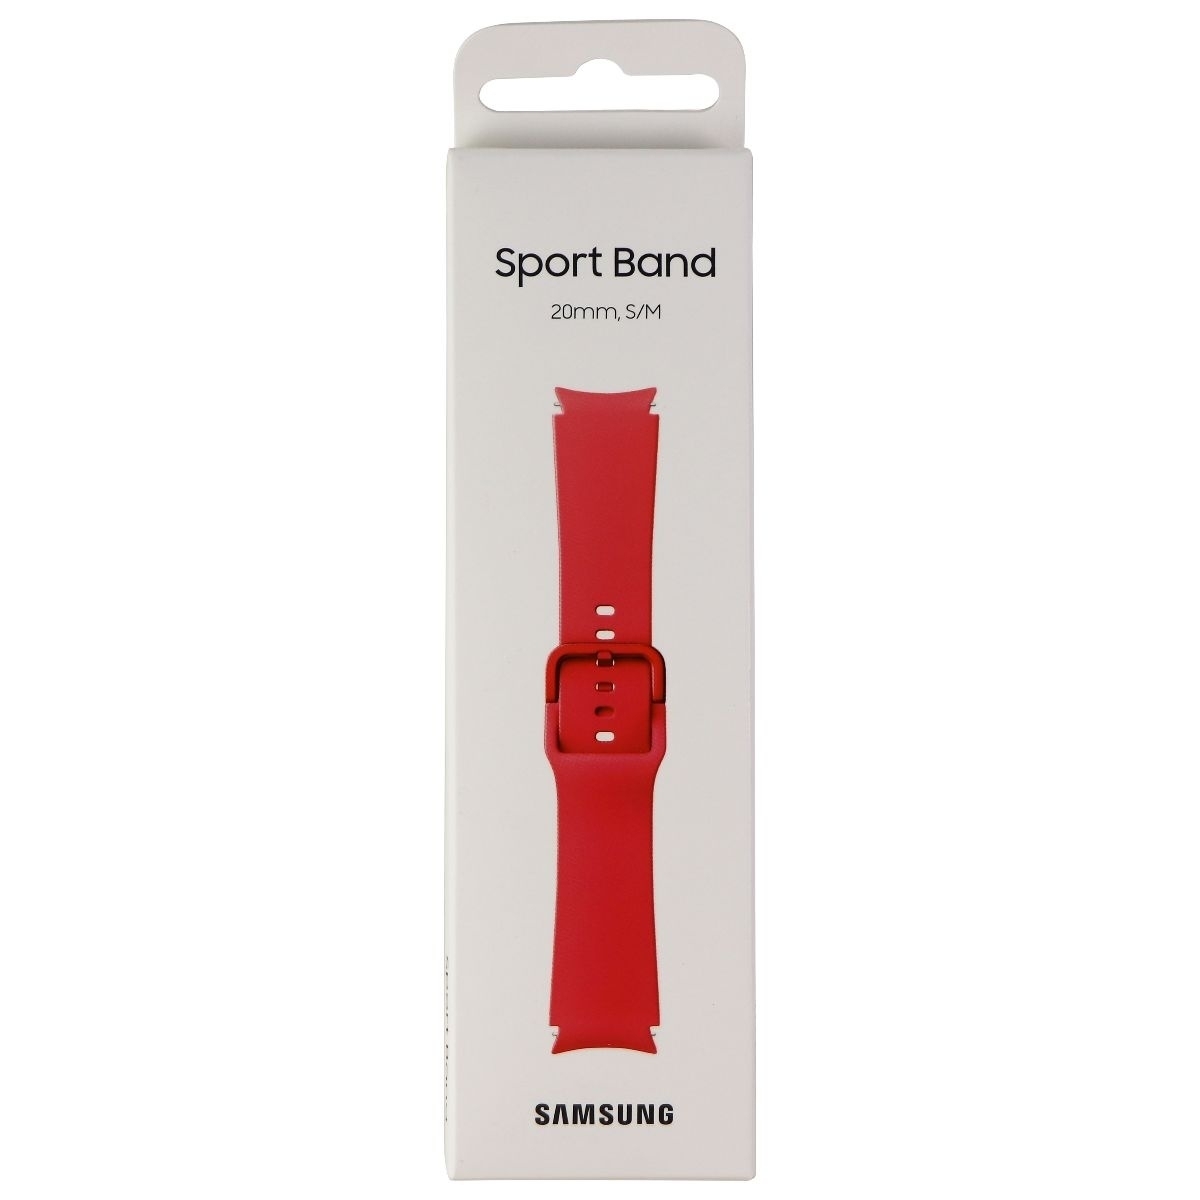 Samsung Sport Band For Galaxy Watch4 & Watch4 Classic - Red (20mm) Small/Medium